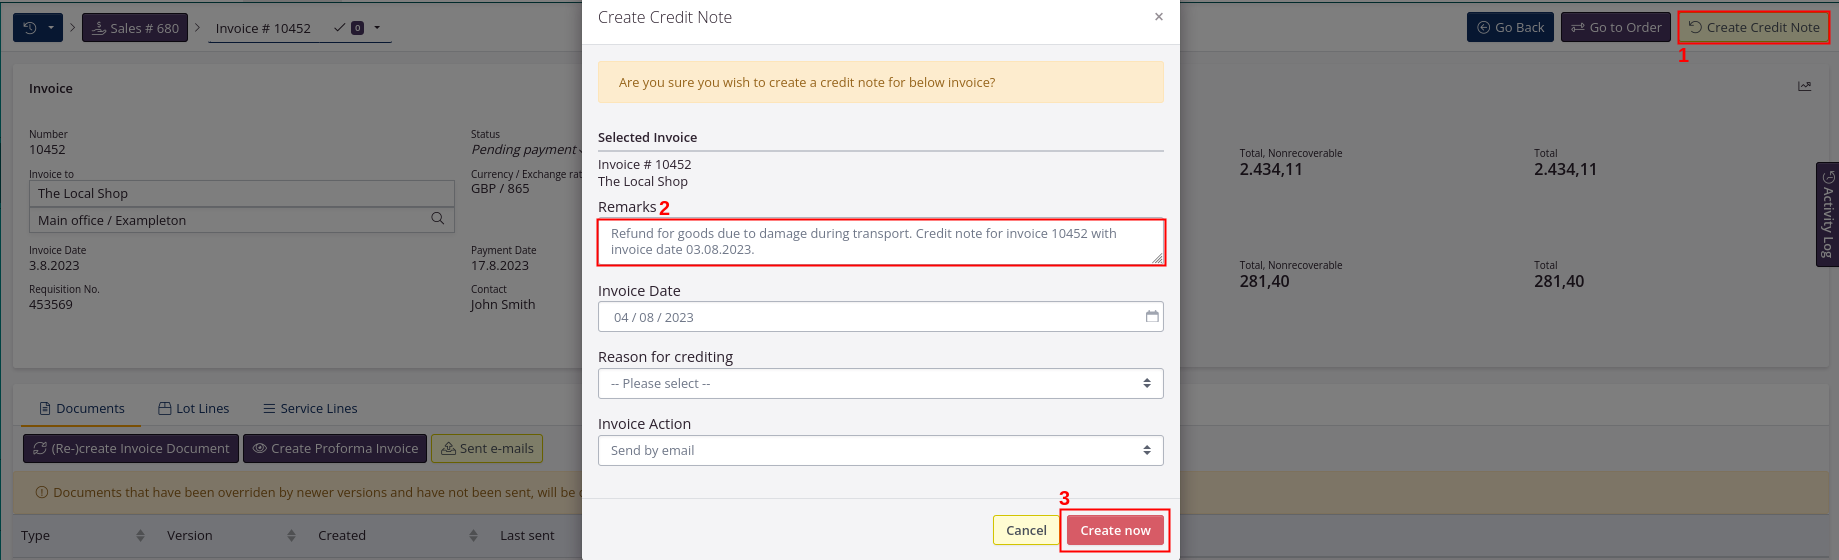 Create credit note - refund with no return of goods